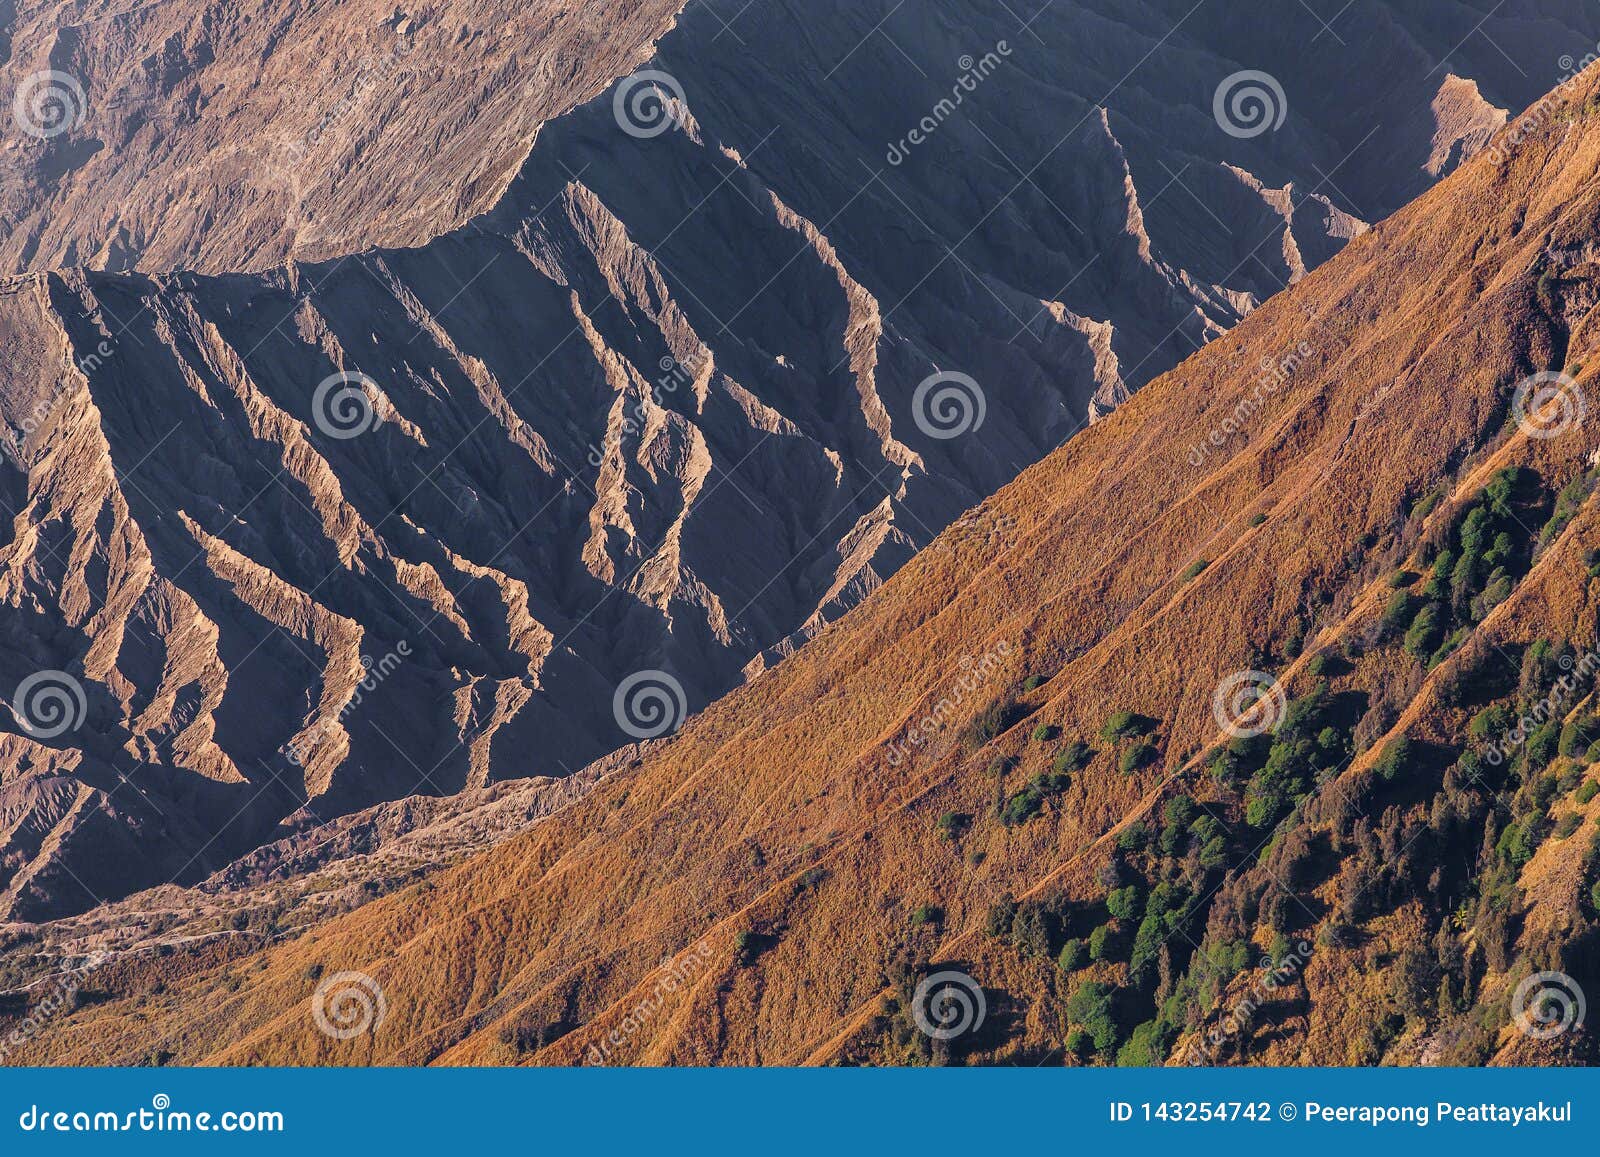 Mount Bromo Volcano (Gunung Bromo) during Sunrise from Viewpoint on